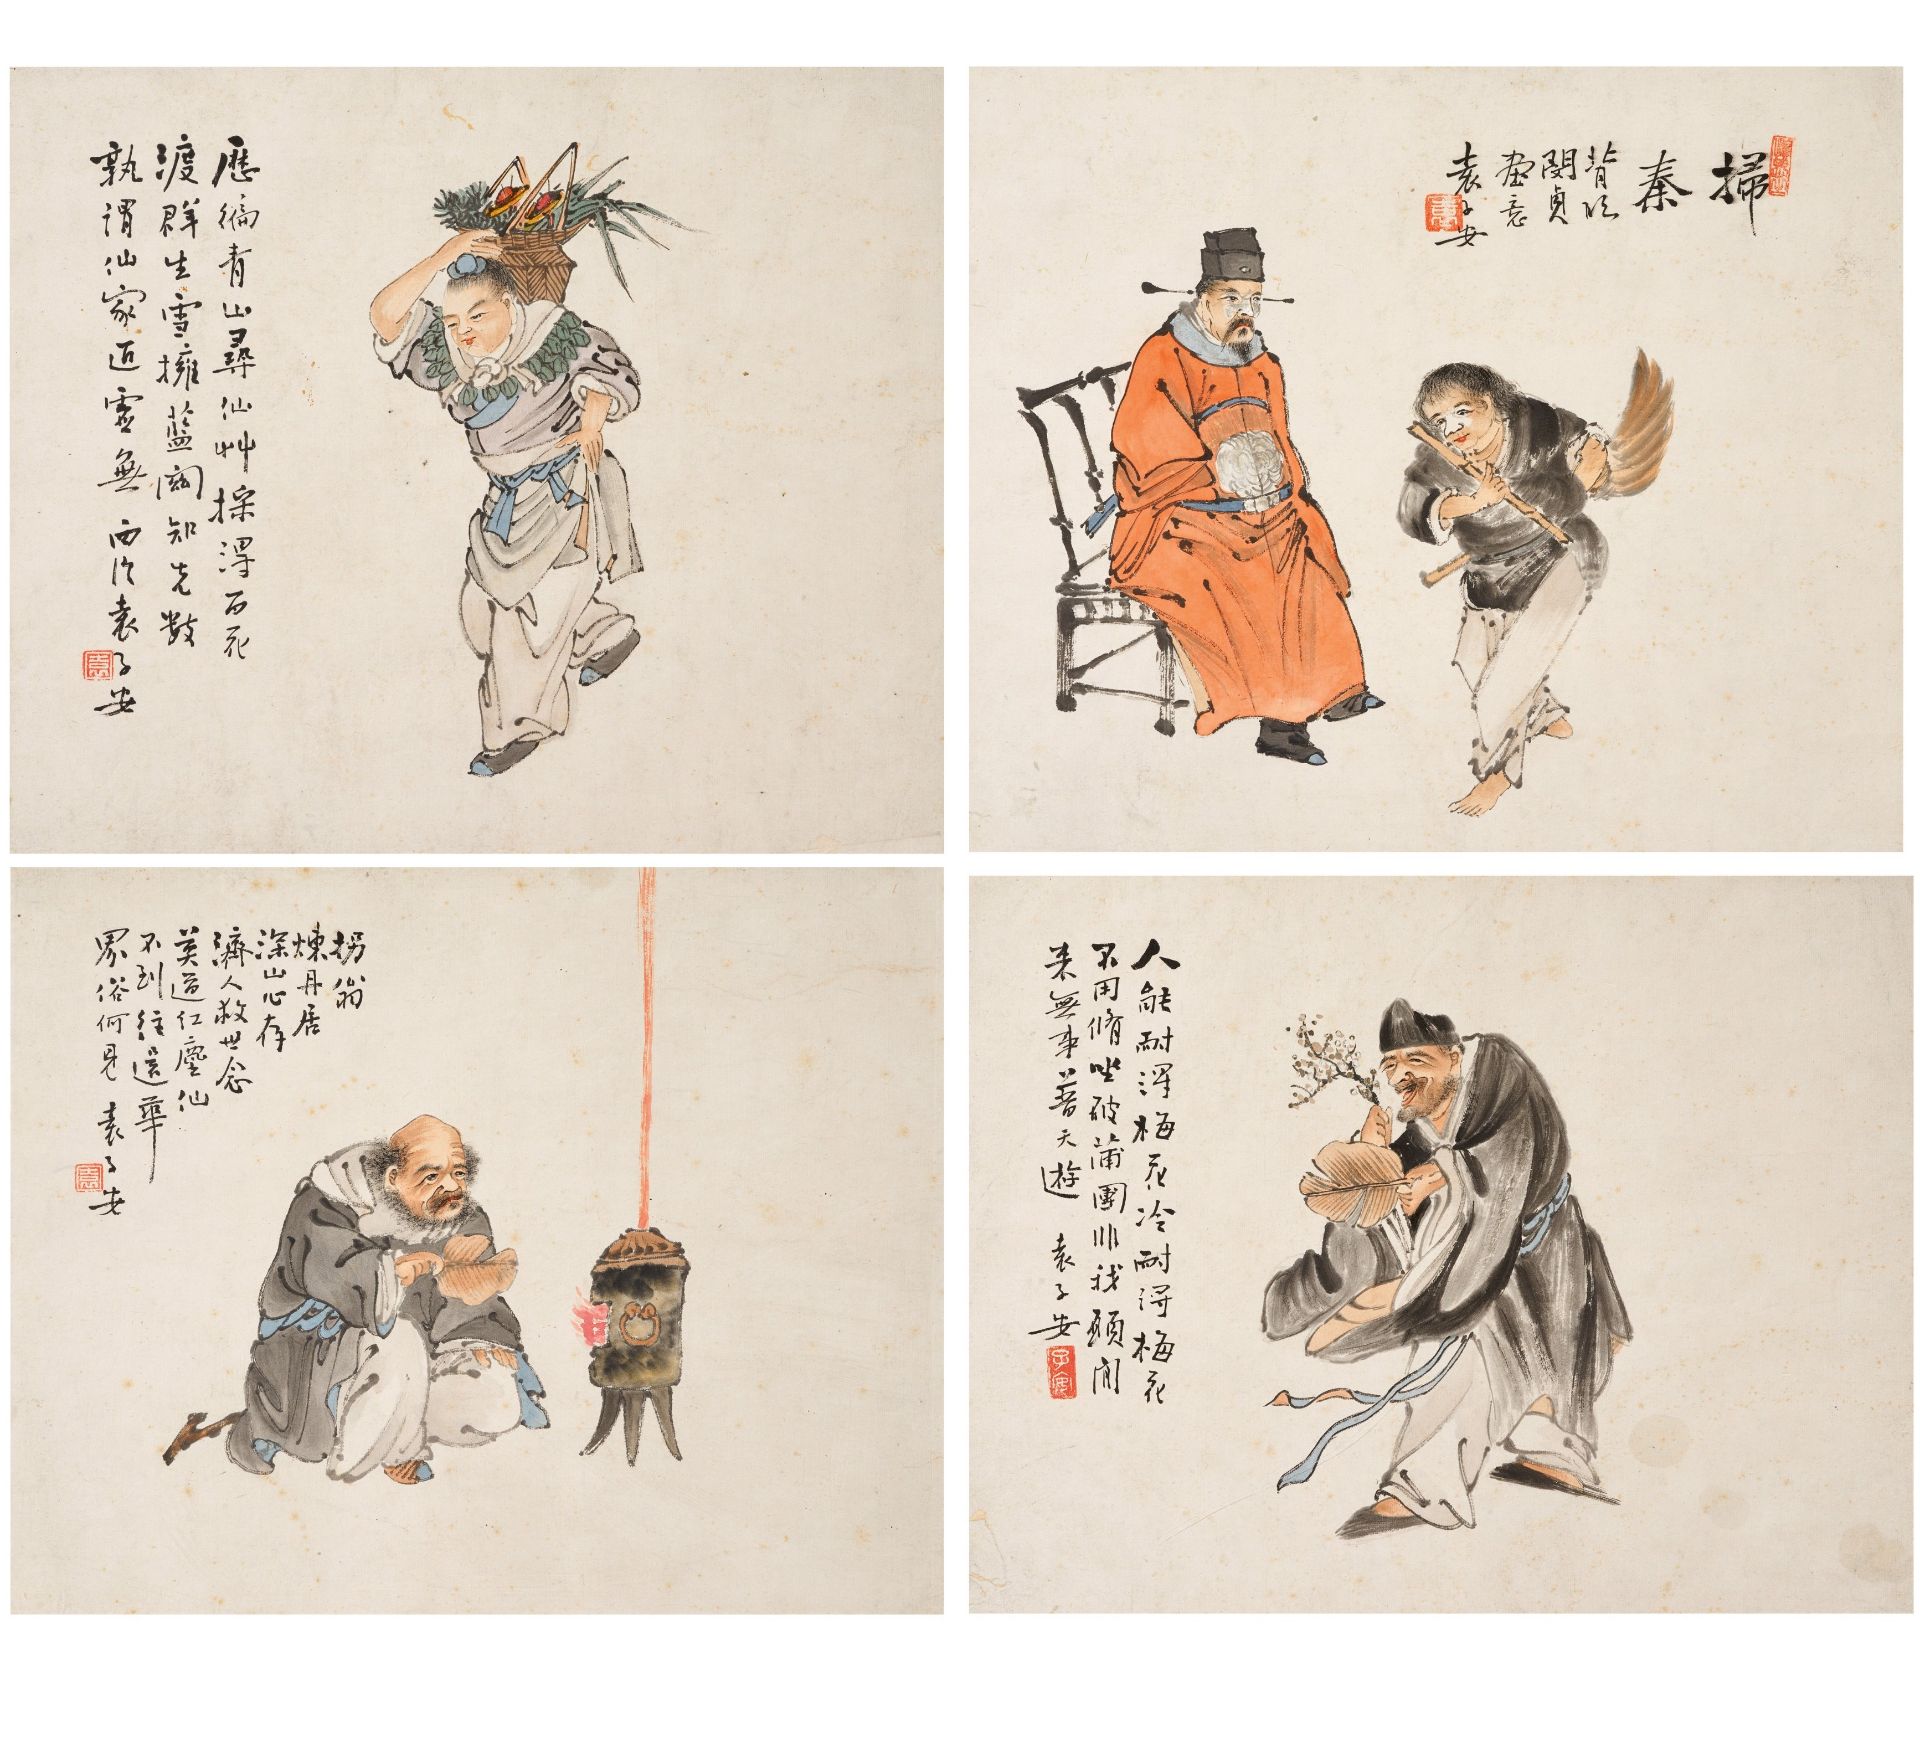 FOUR ALBUM LEAFS WITH IMMORTALS AND GENRE SCENES. China. Republic period (1912-1949). Ink and